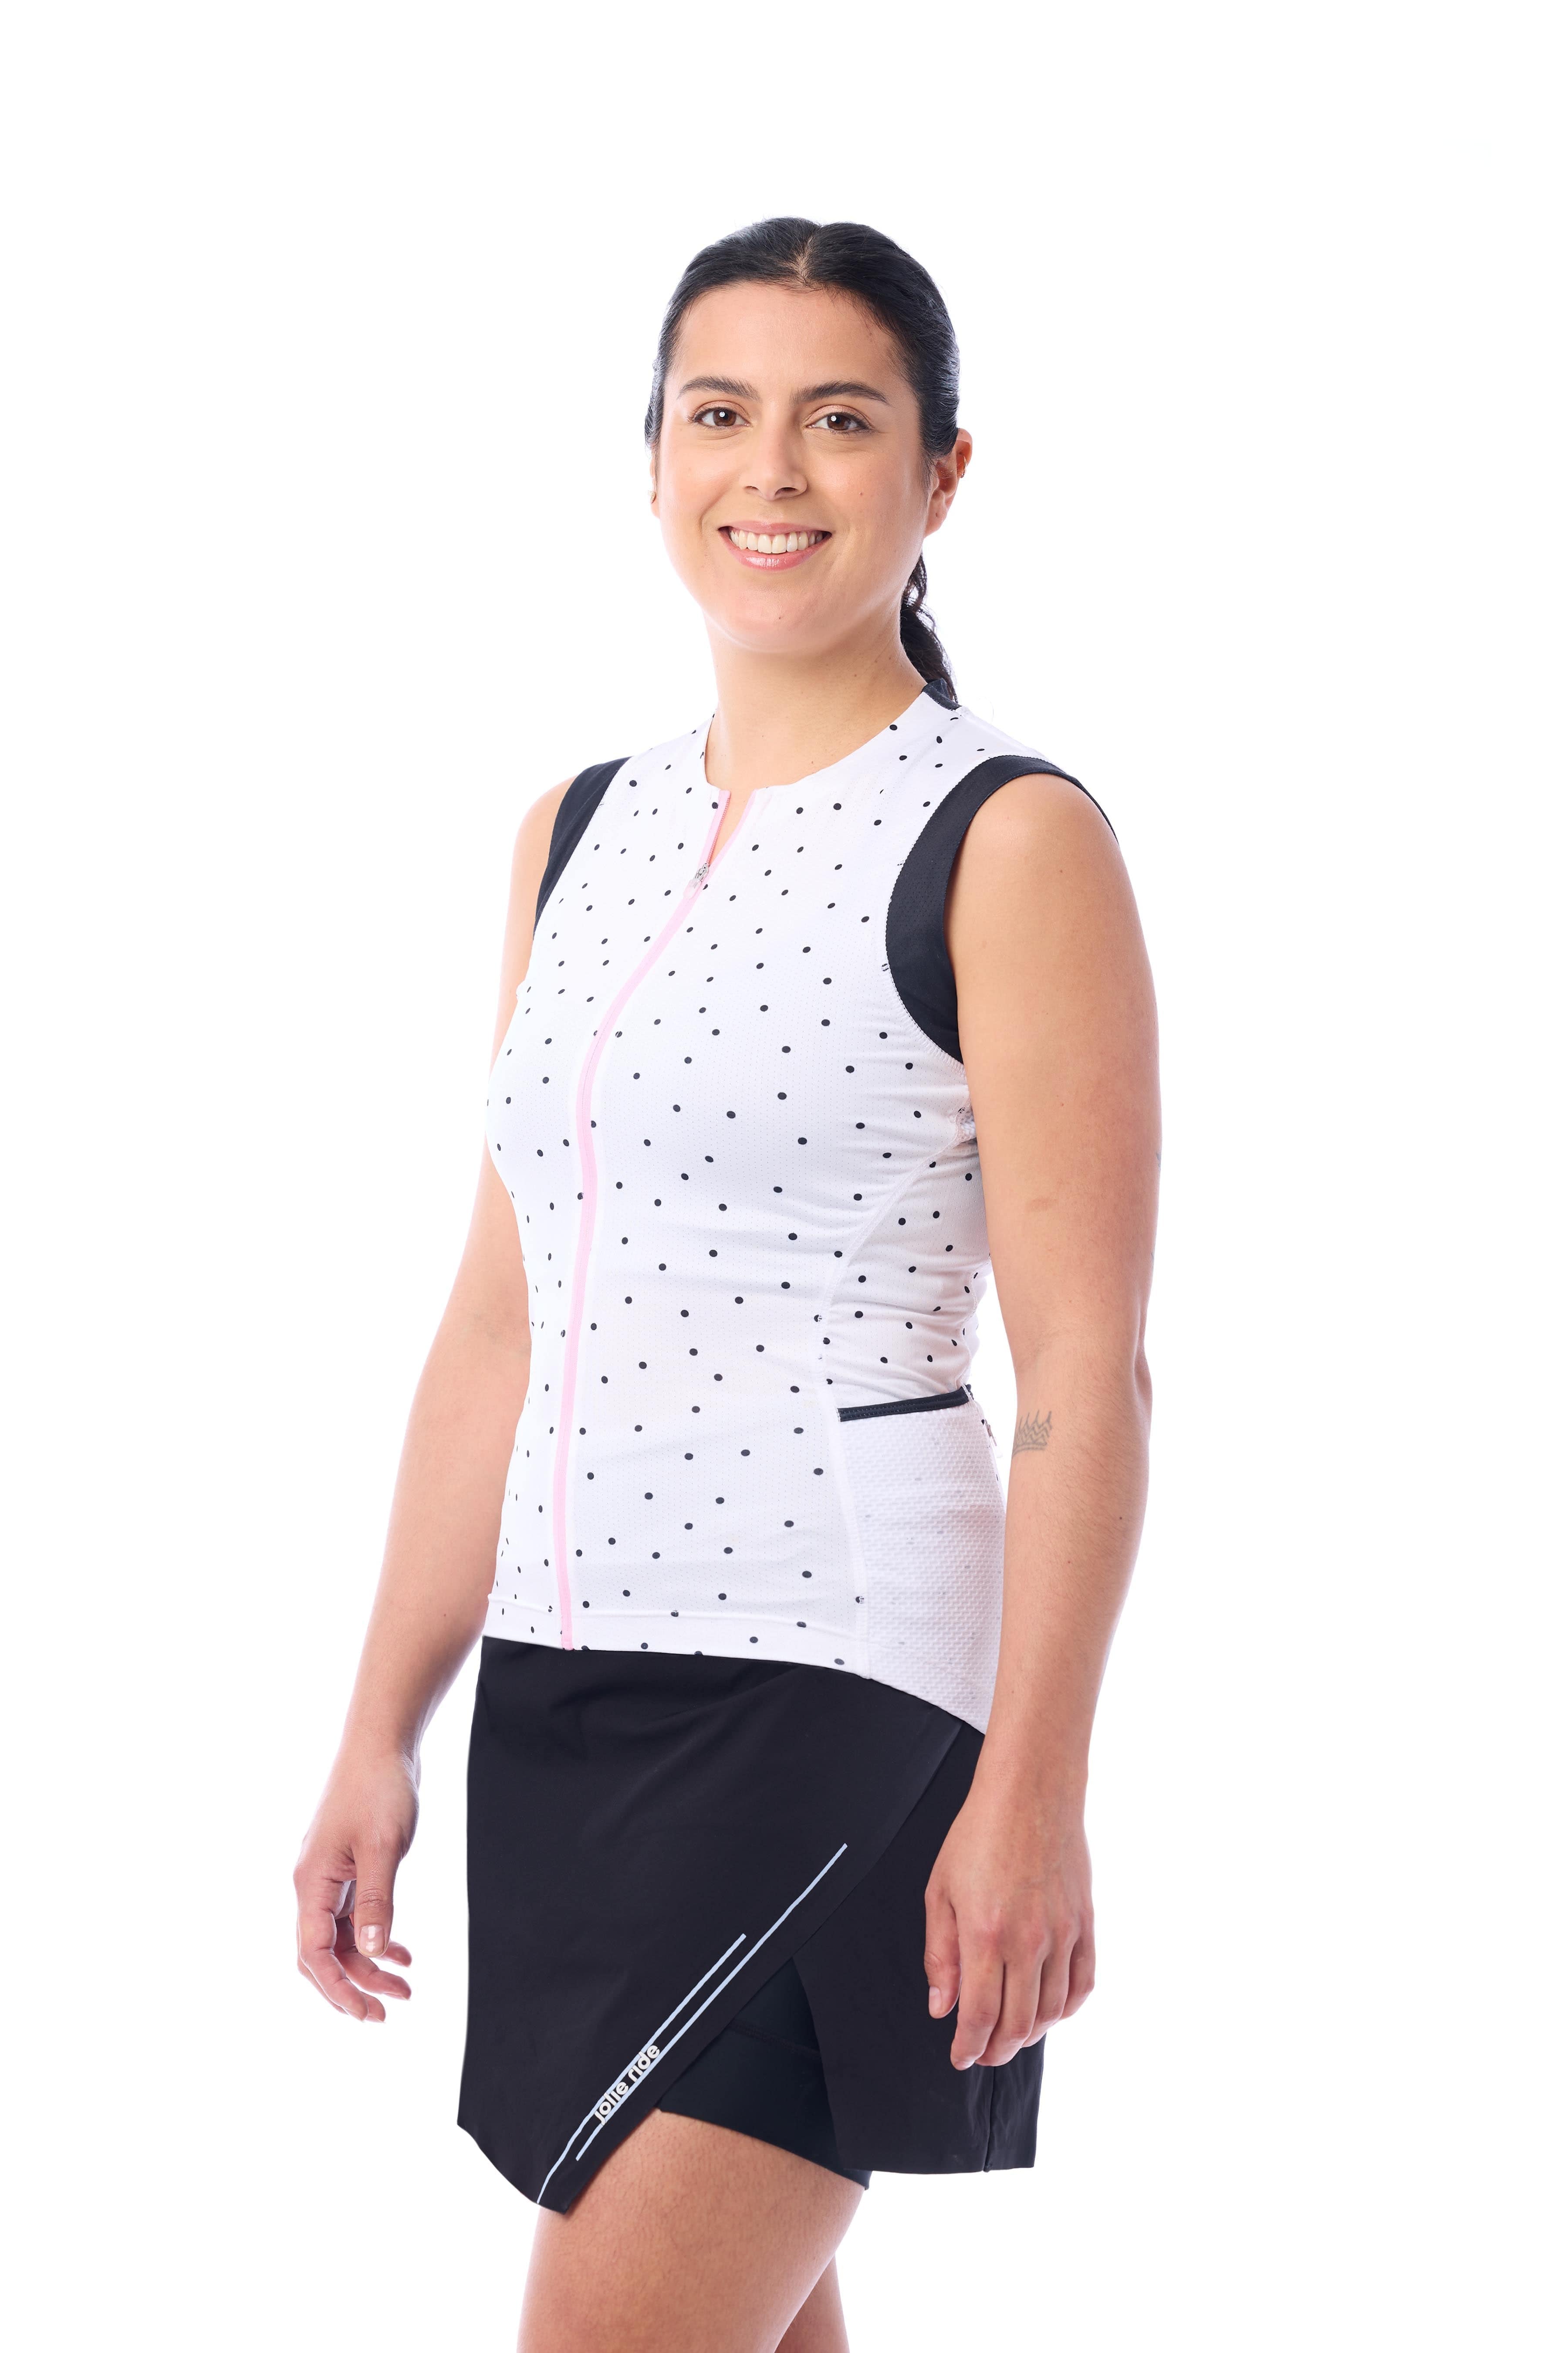 JolieRide Skirt cycling skirt with cycling shorts and 50+ UV protection